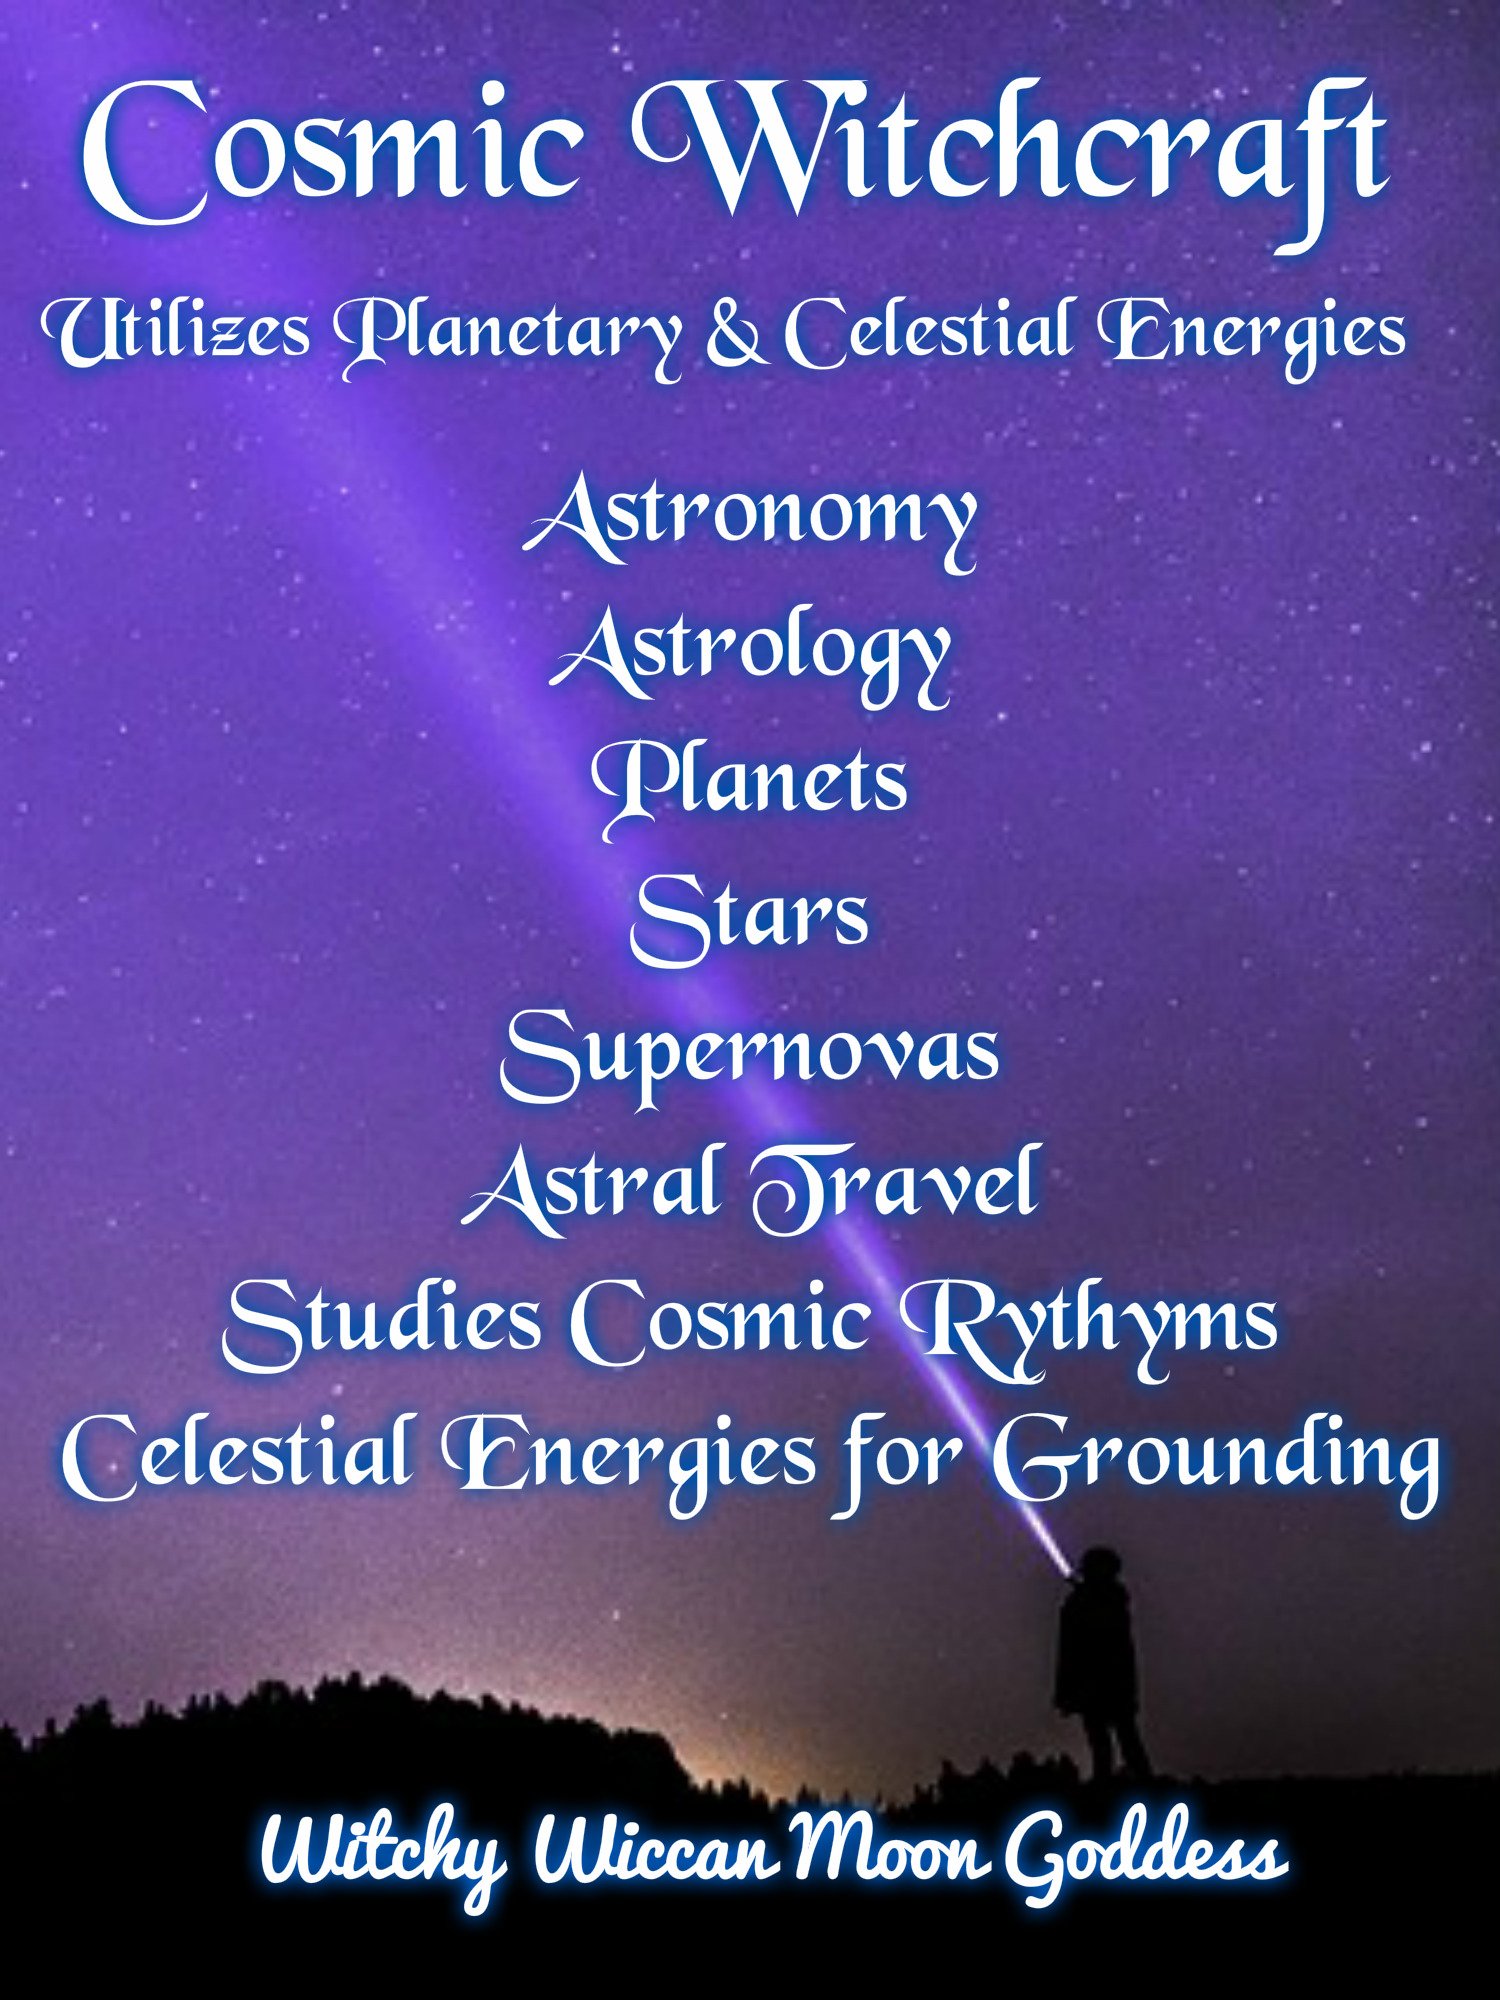 Cosmic Witchcraft: Utilizes Planetary & Celestial Energies. Astronomy, Astrology, Planets, Stars. Supernovas, Astral Travel. Studies cosmic rythyms. Celestial energies for grounding.